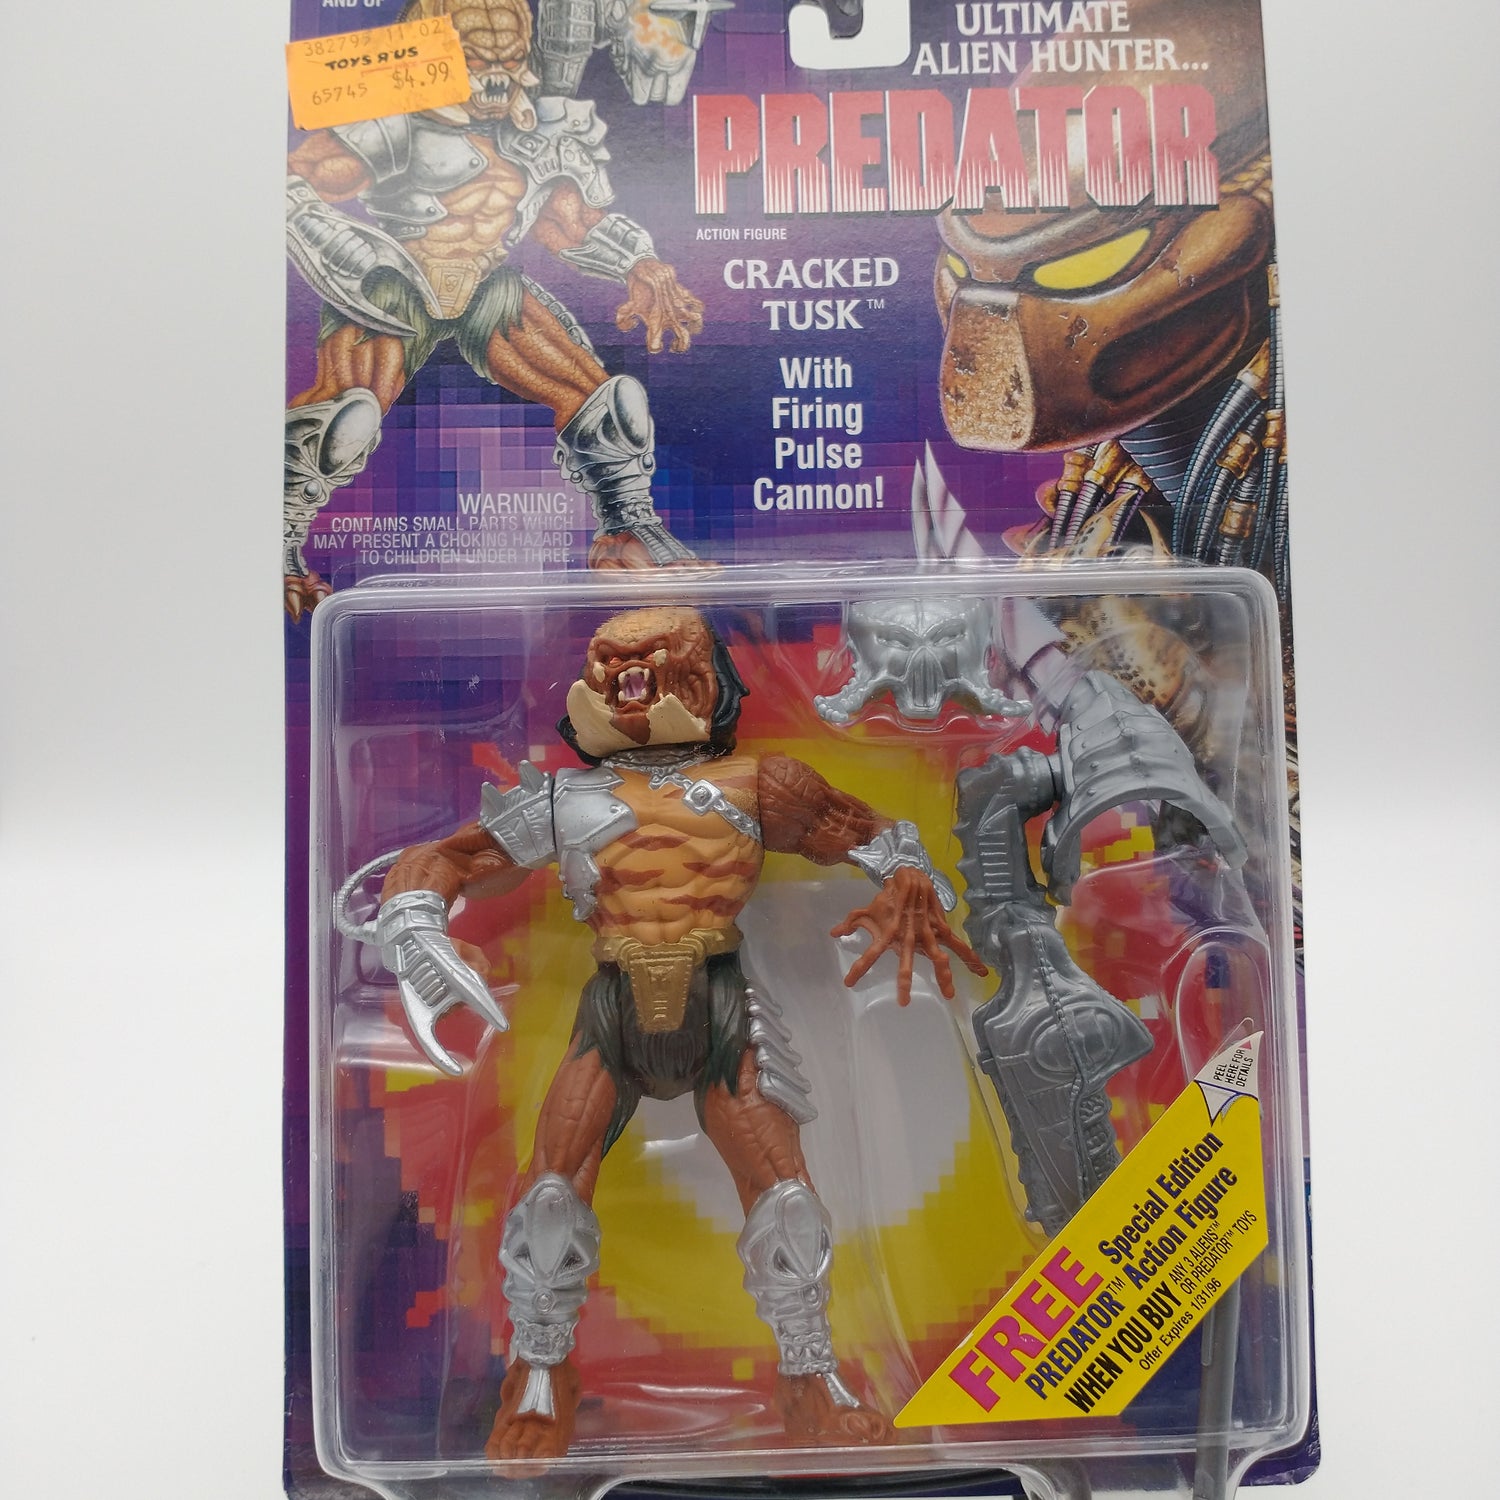 The front of the cart and bubble. The bubble is sealed with the action figure inside, alongside the action figure is it's armor including a mask.